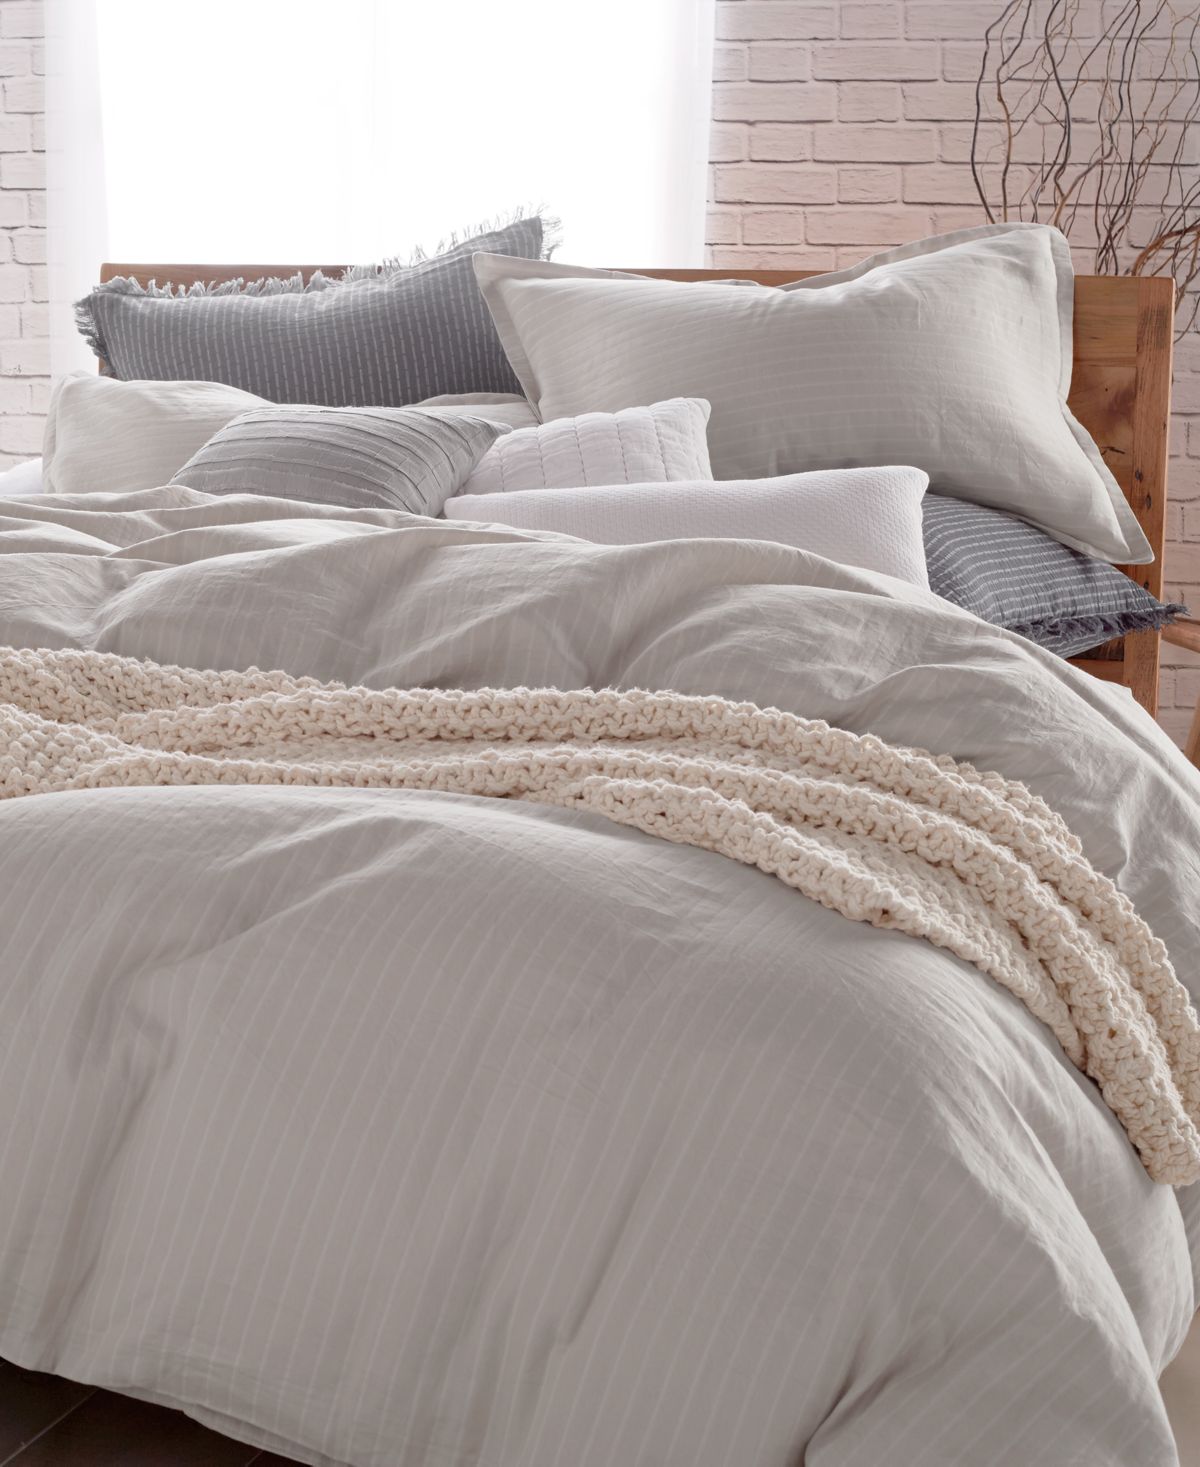 MACYS BEDDING CLEARANCE SALE NOW UP TO 60% OFF! dealsaving